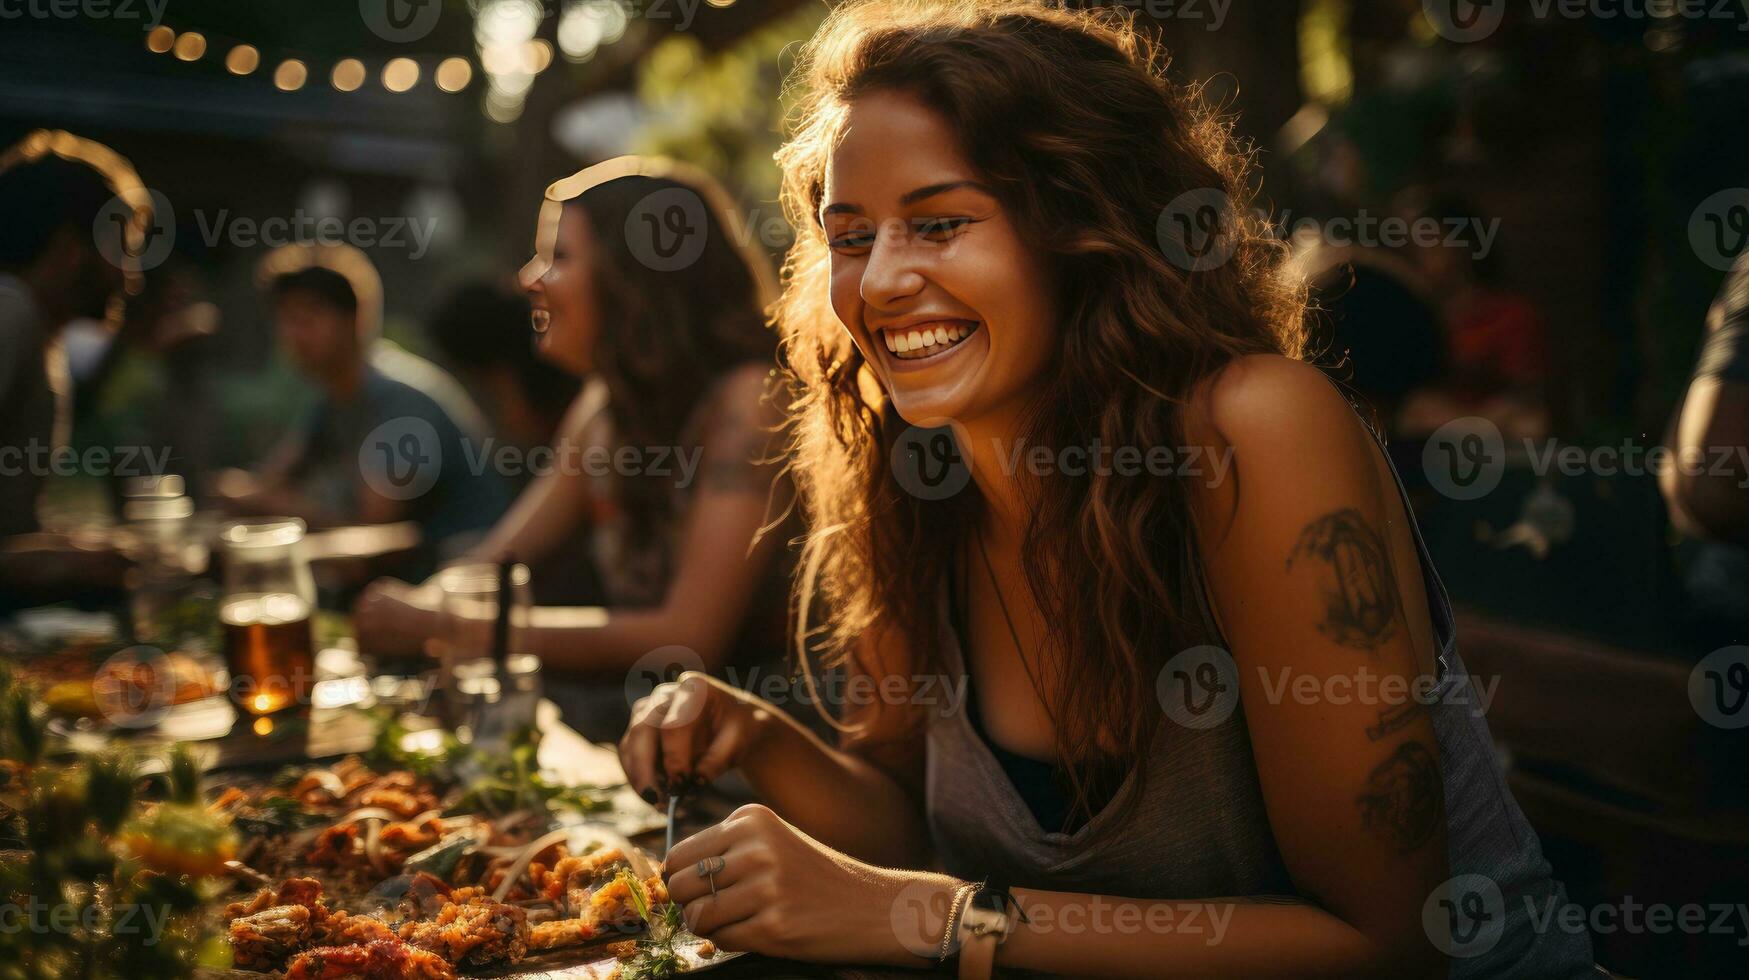 Joyful Woman Laughing at Outdoor Sunset Gathering with Friends photo